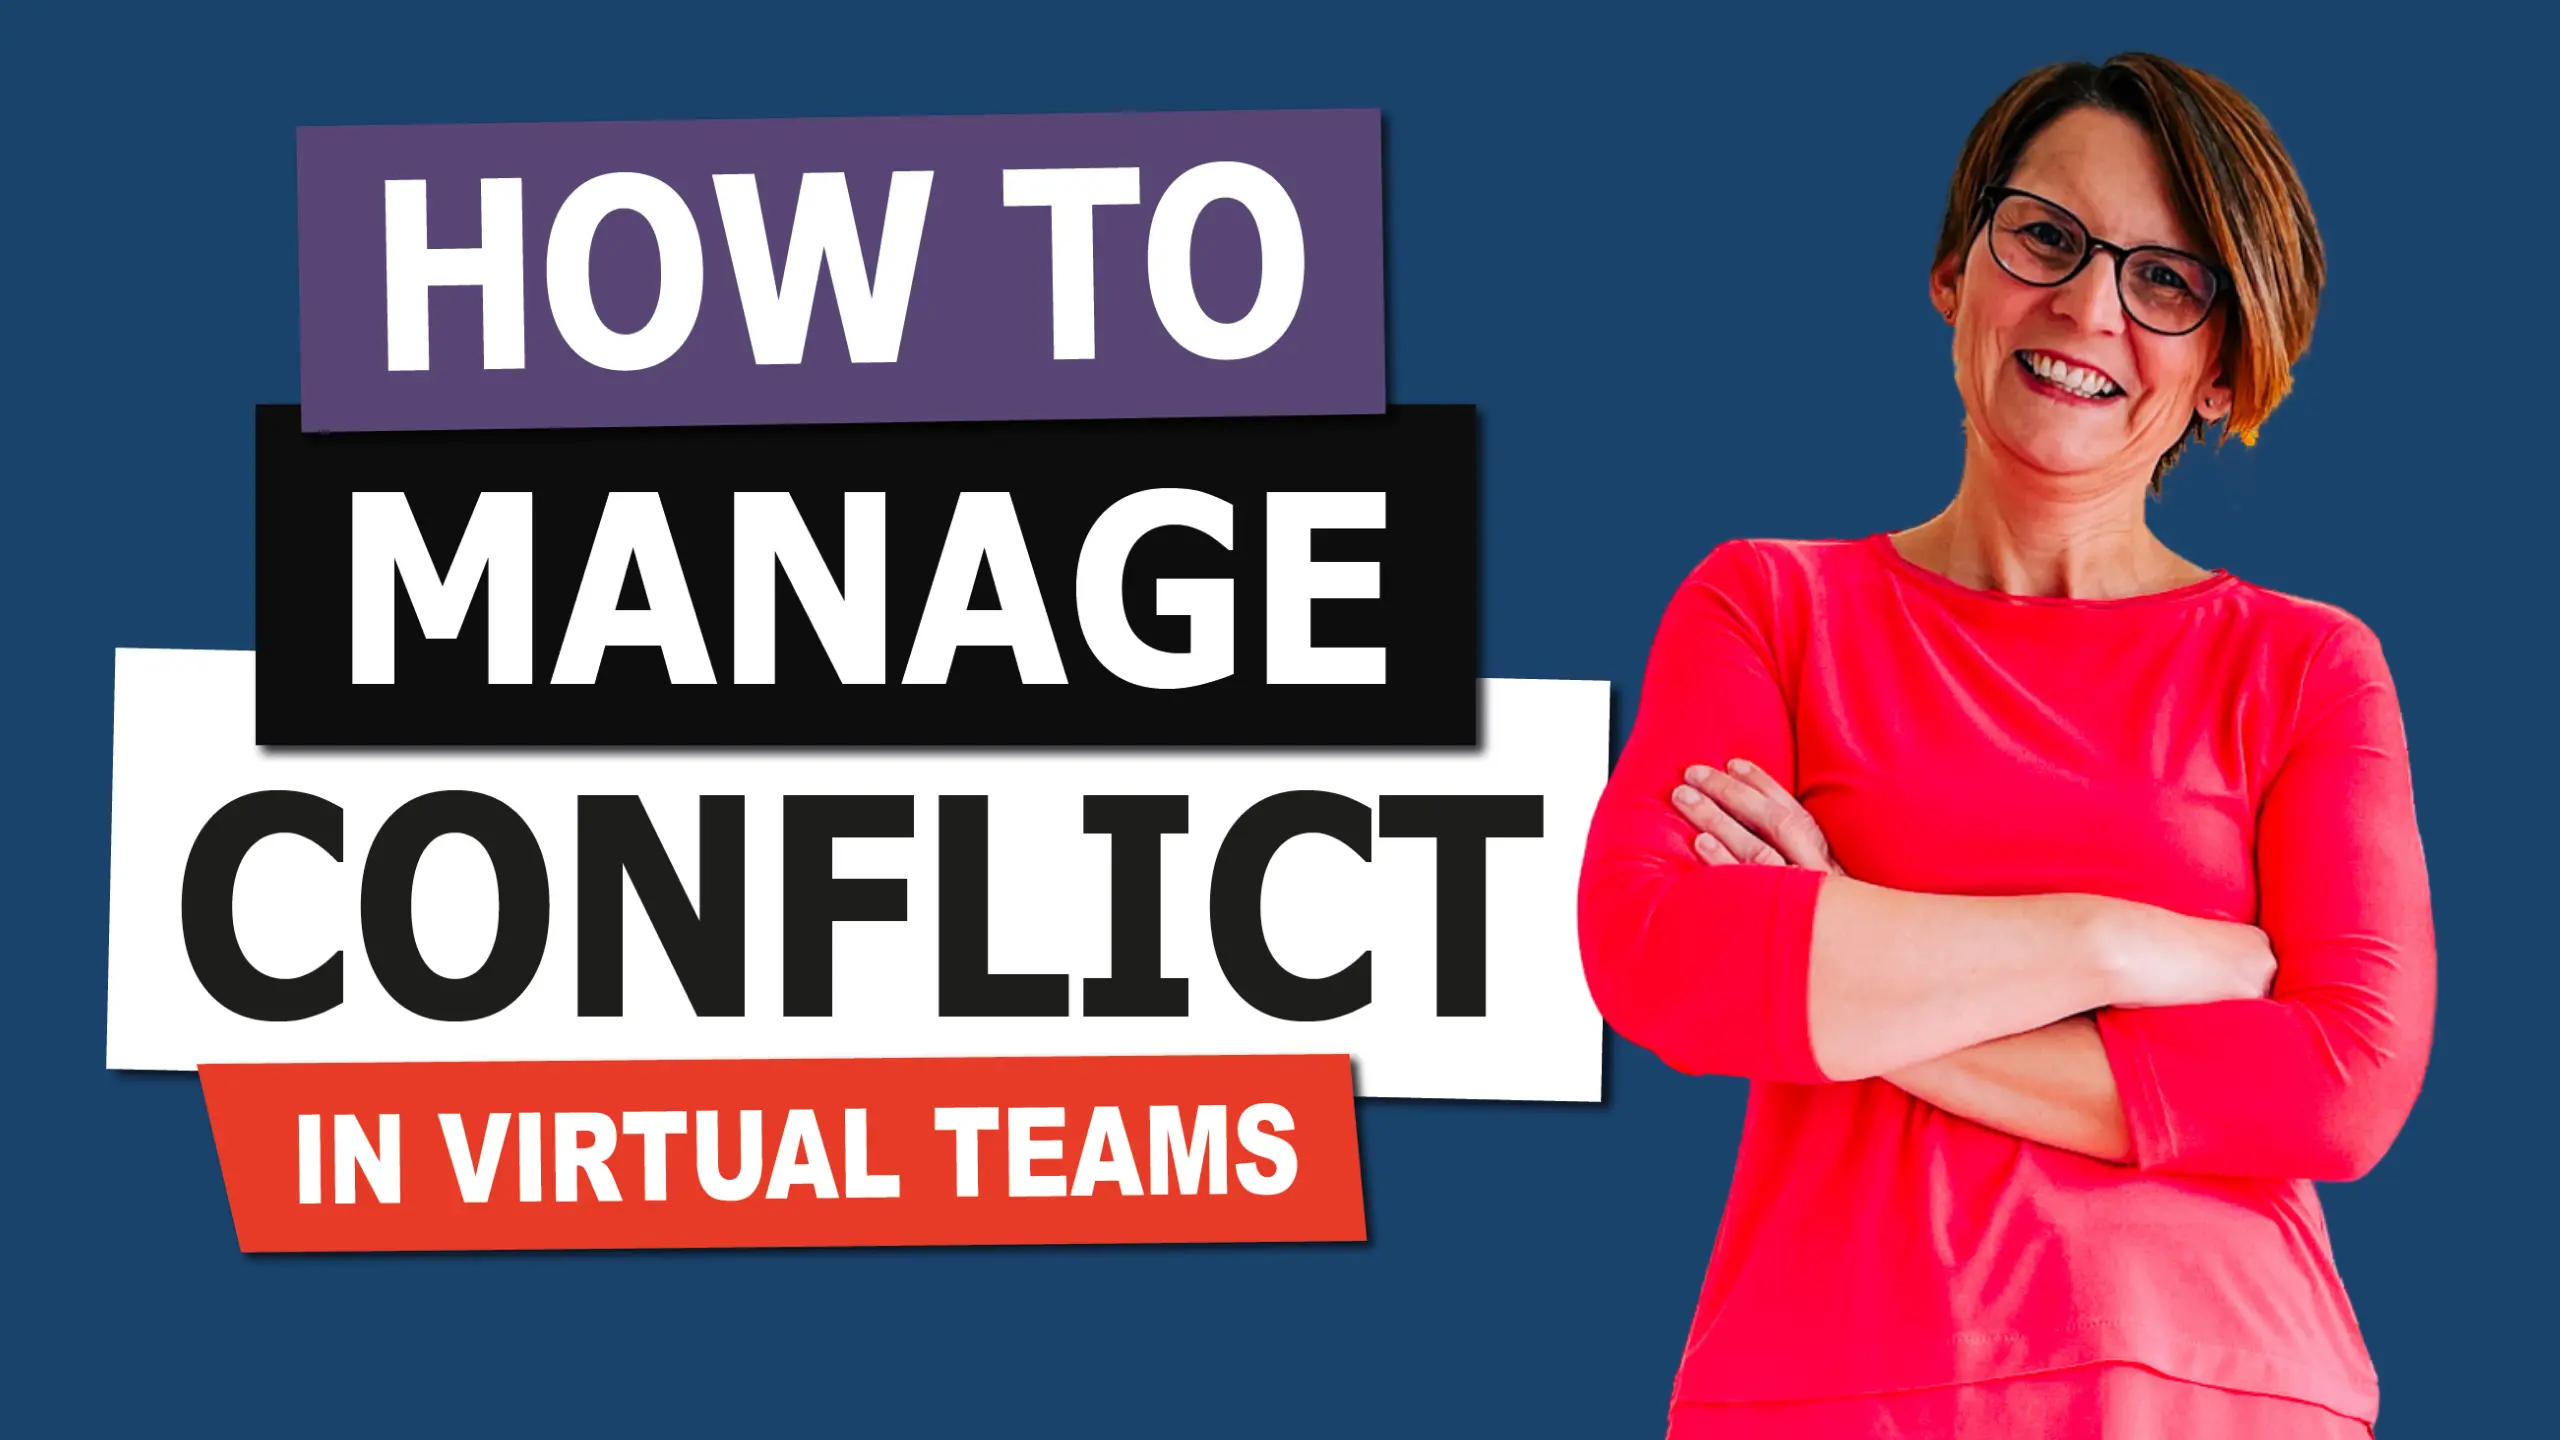 How to Manage Conflict in Virutal Teams with Liane Davey